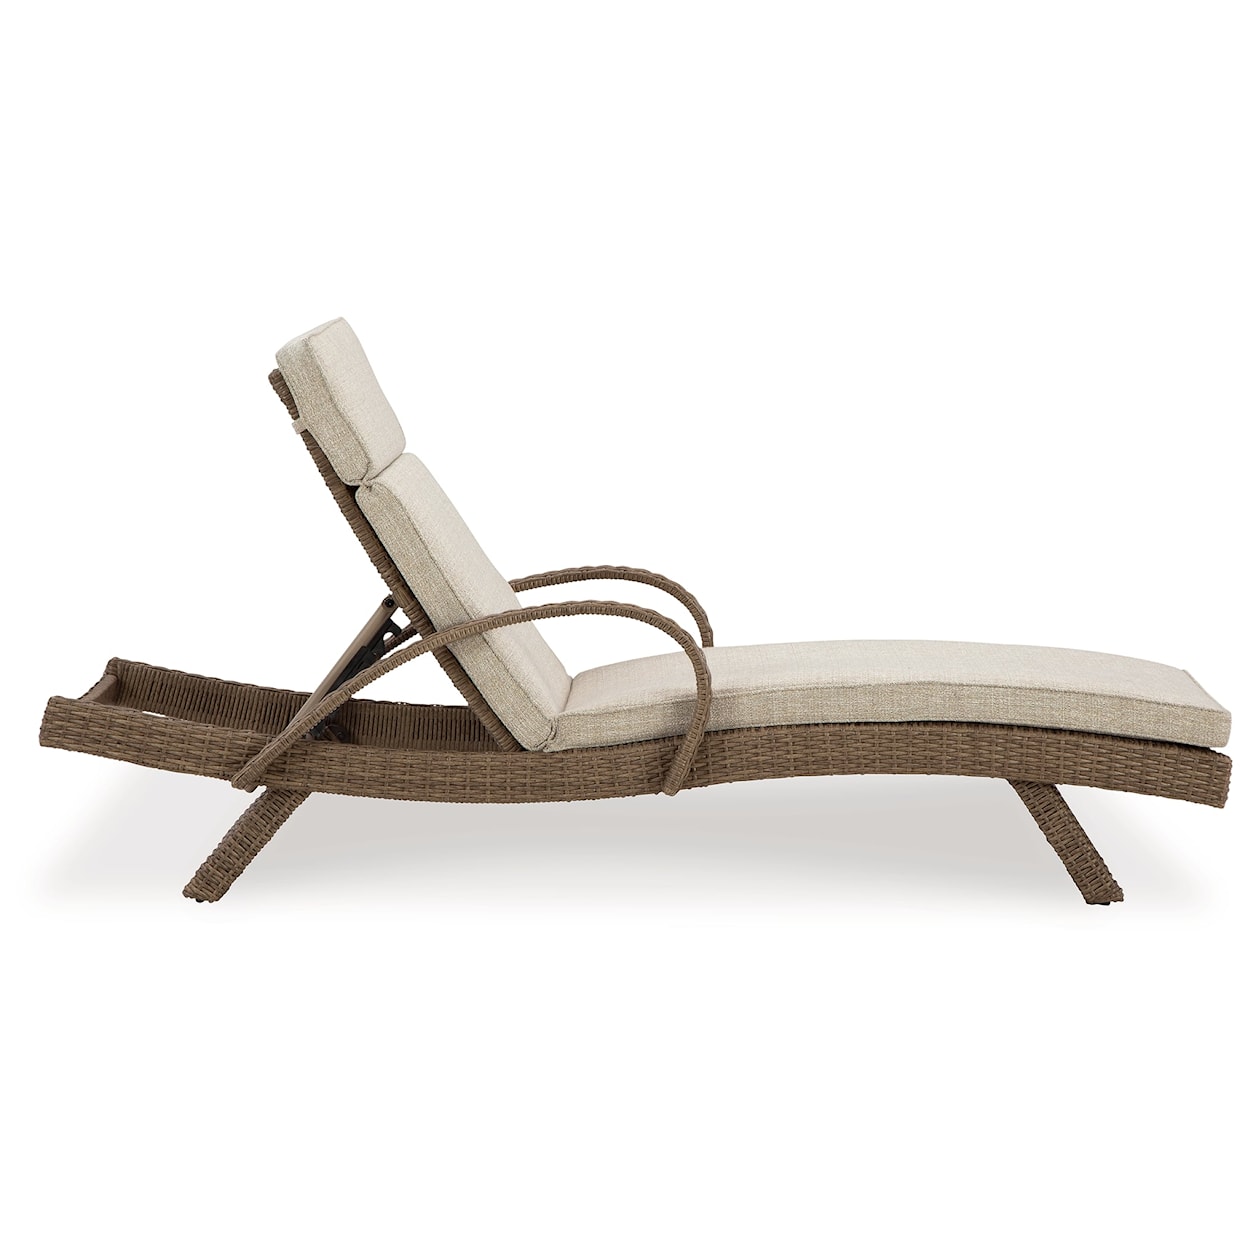 Signature Design by Ashley Beachcroft Chaise Lounge with Cushion